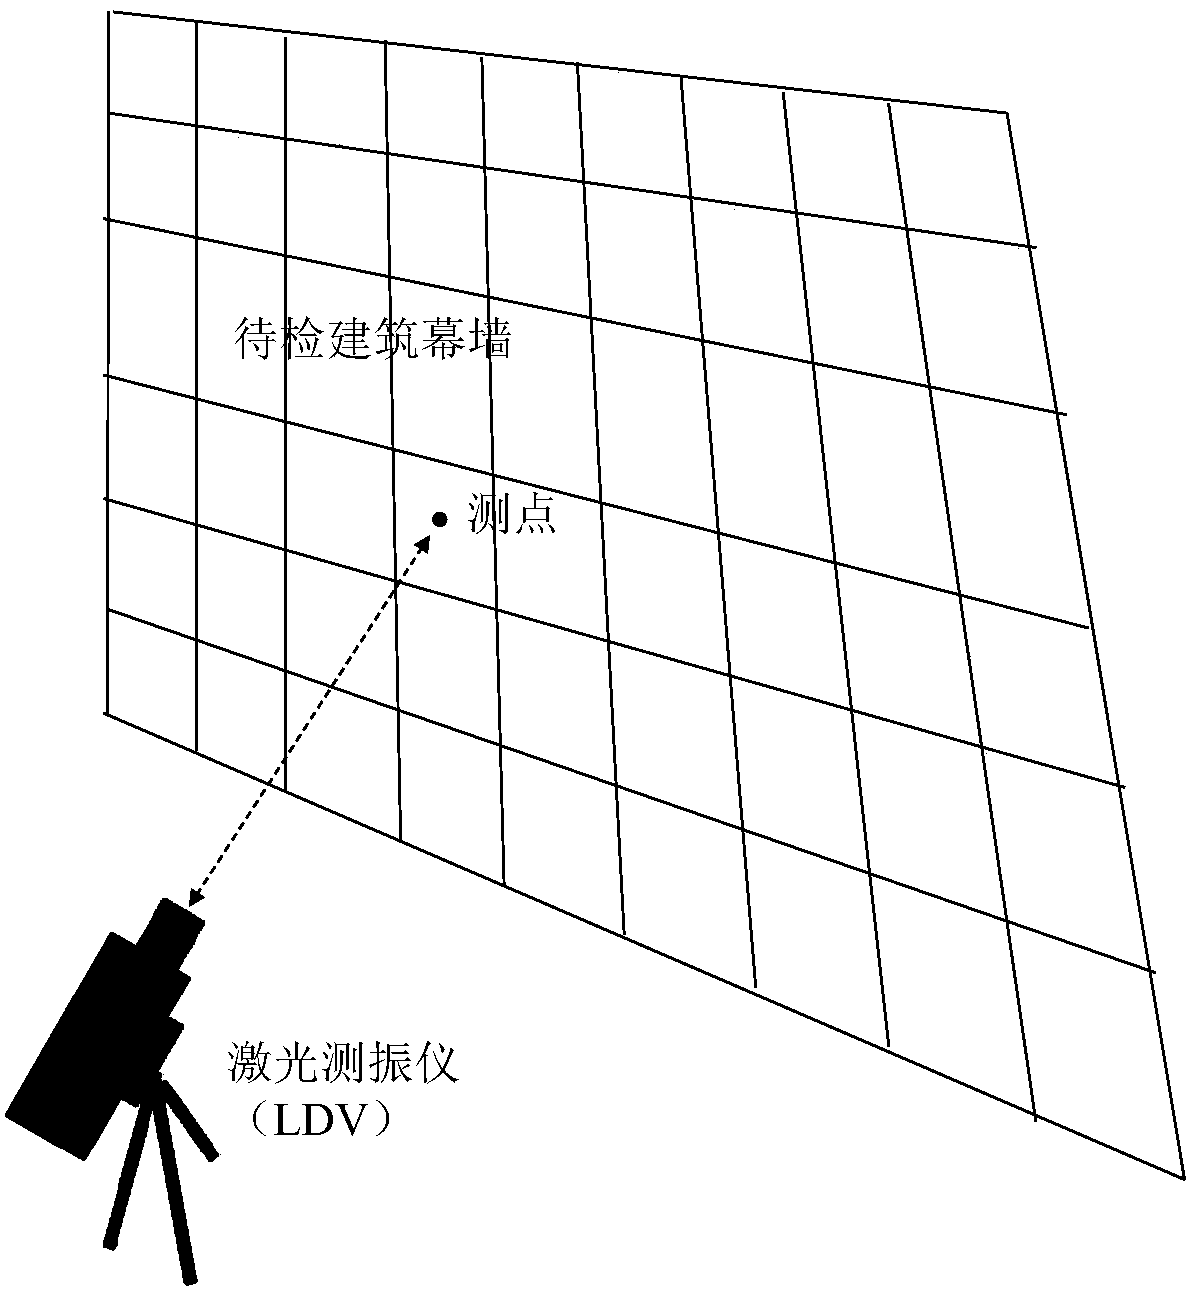 Building curtain wall safety state remote detection method based on laser vibration measurement technology